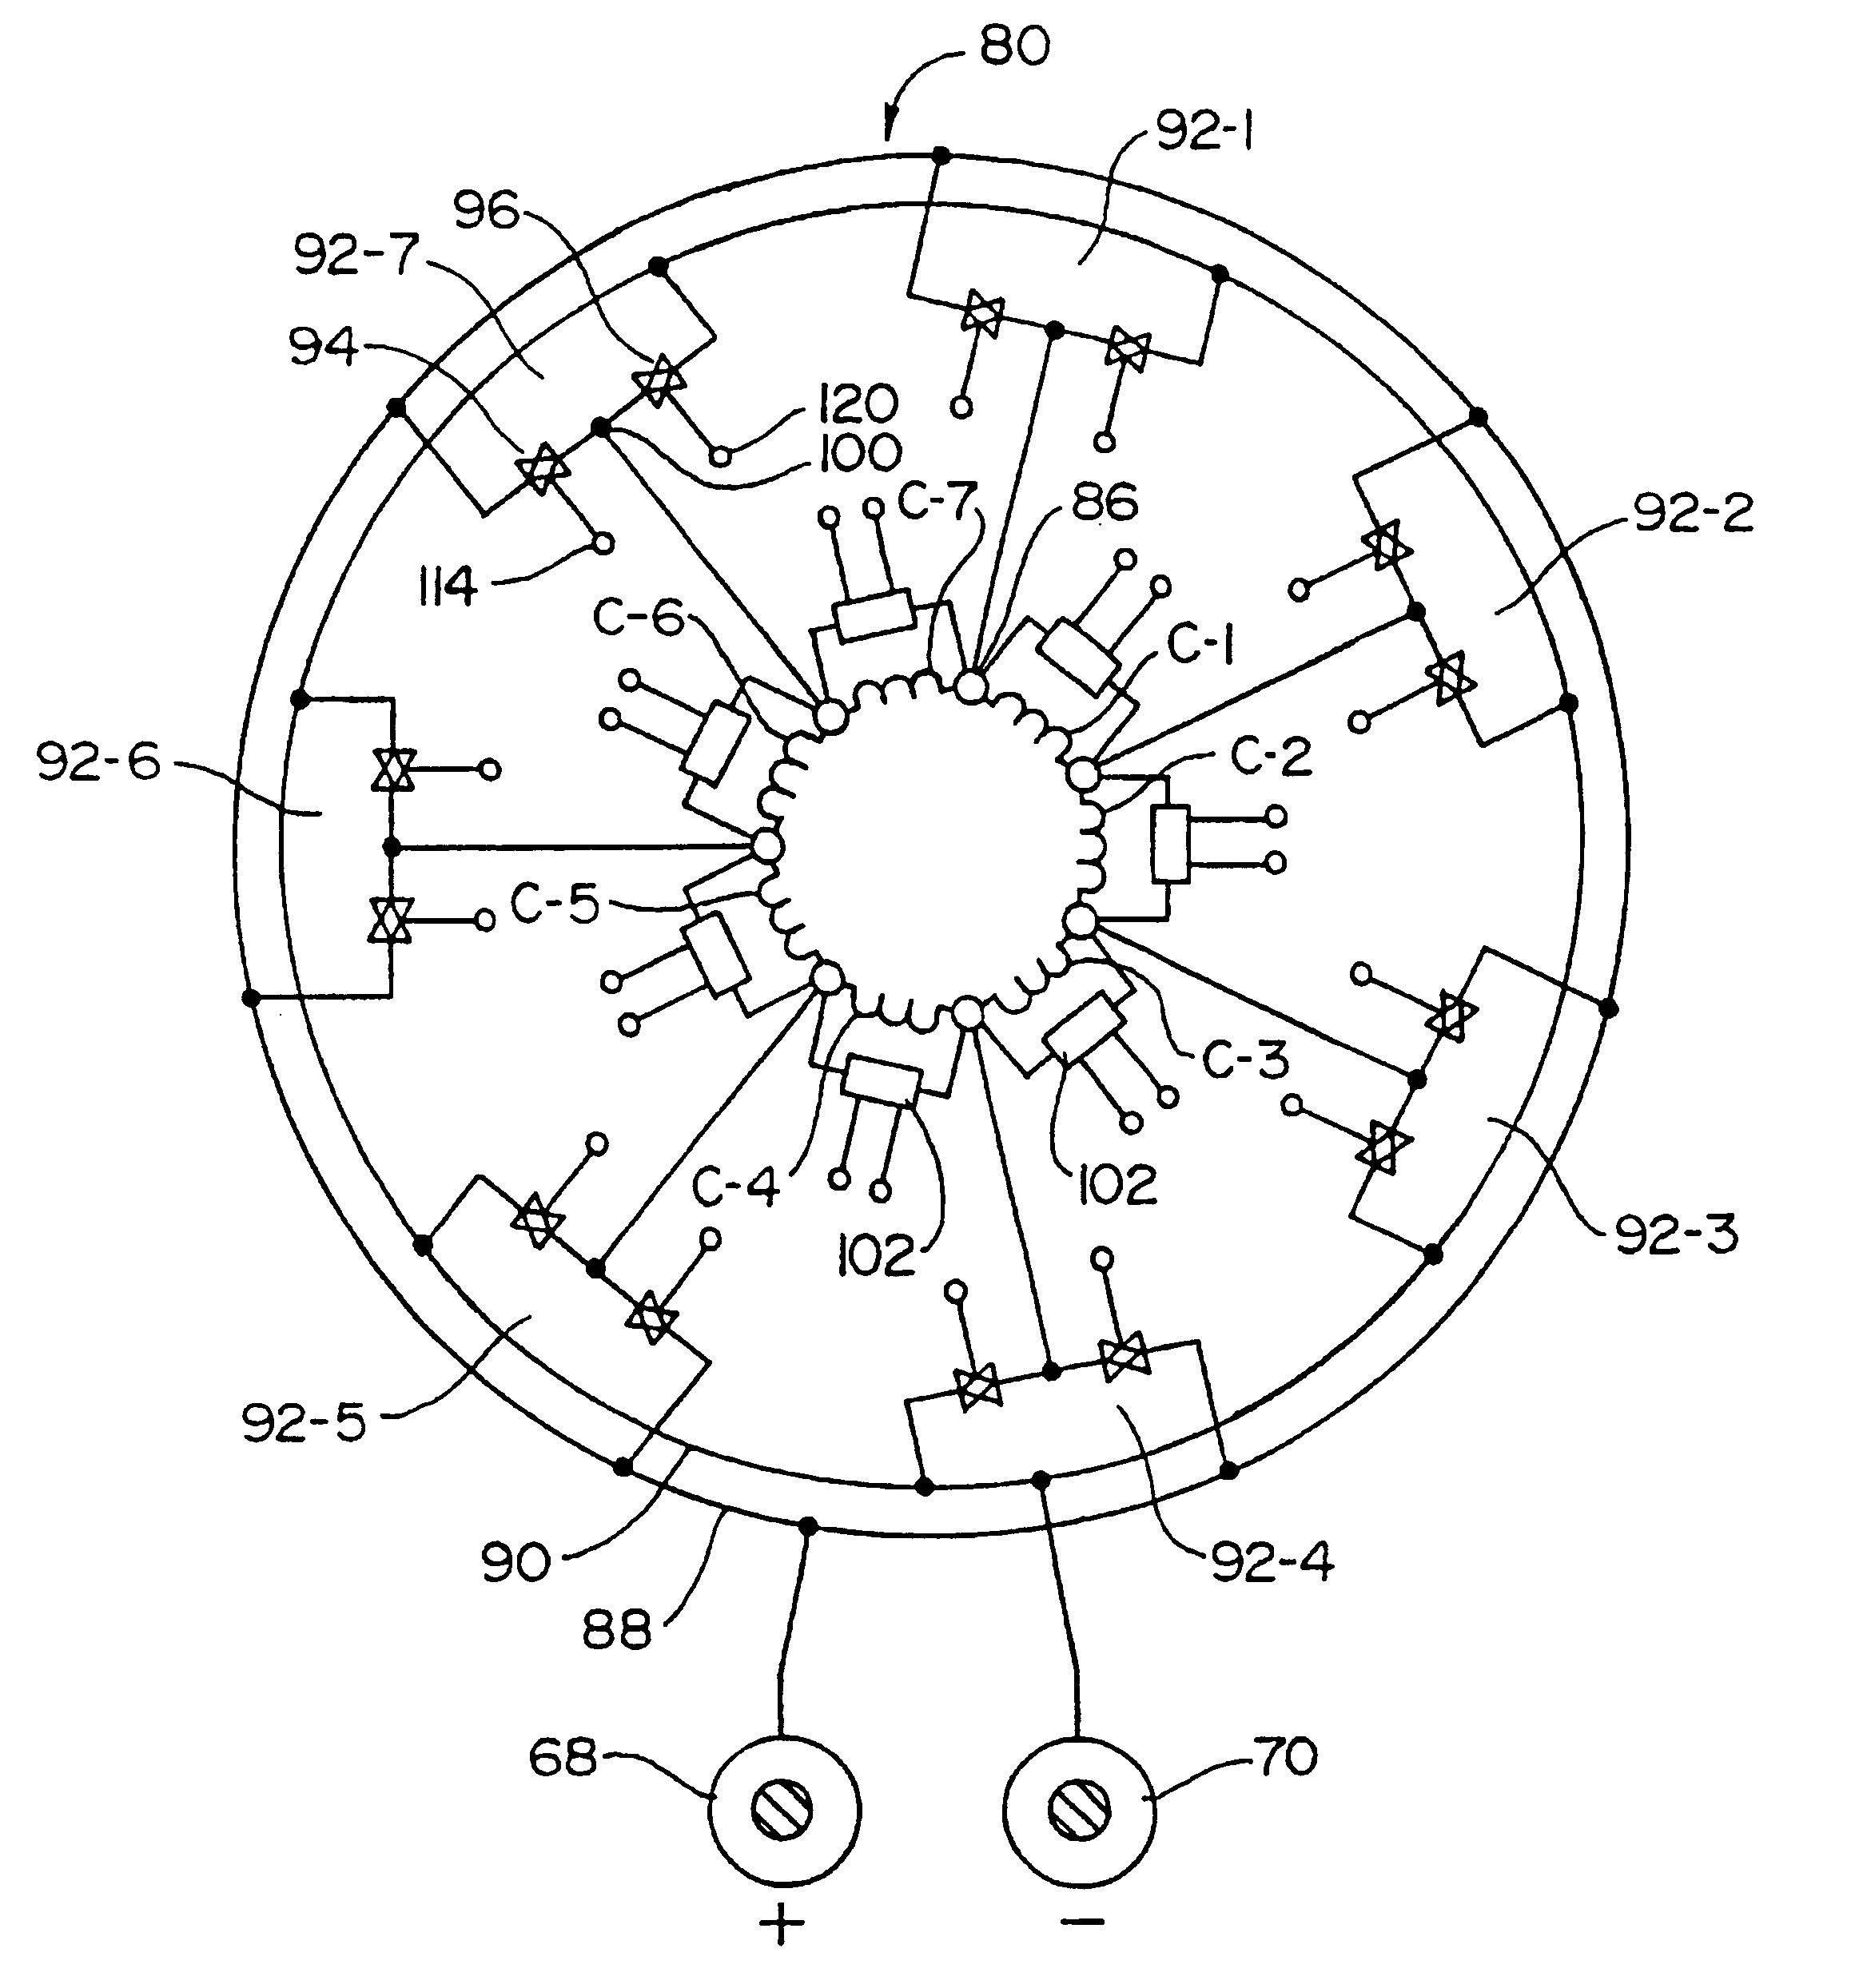 Dynamo-electric machines and control and operating system for the same